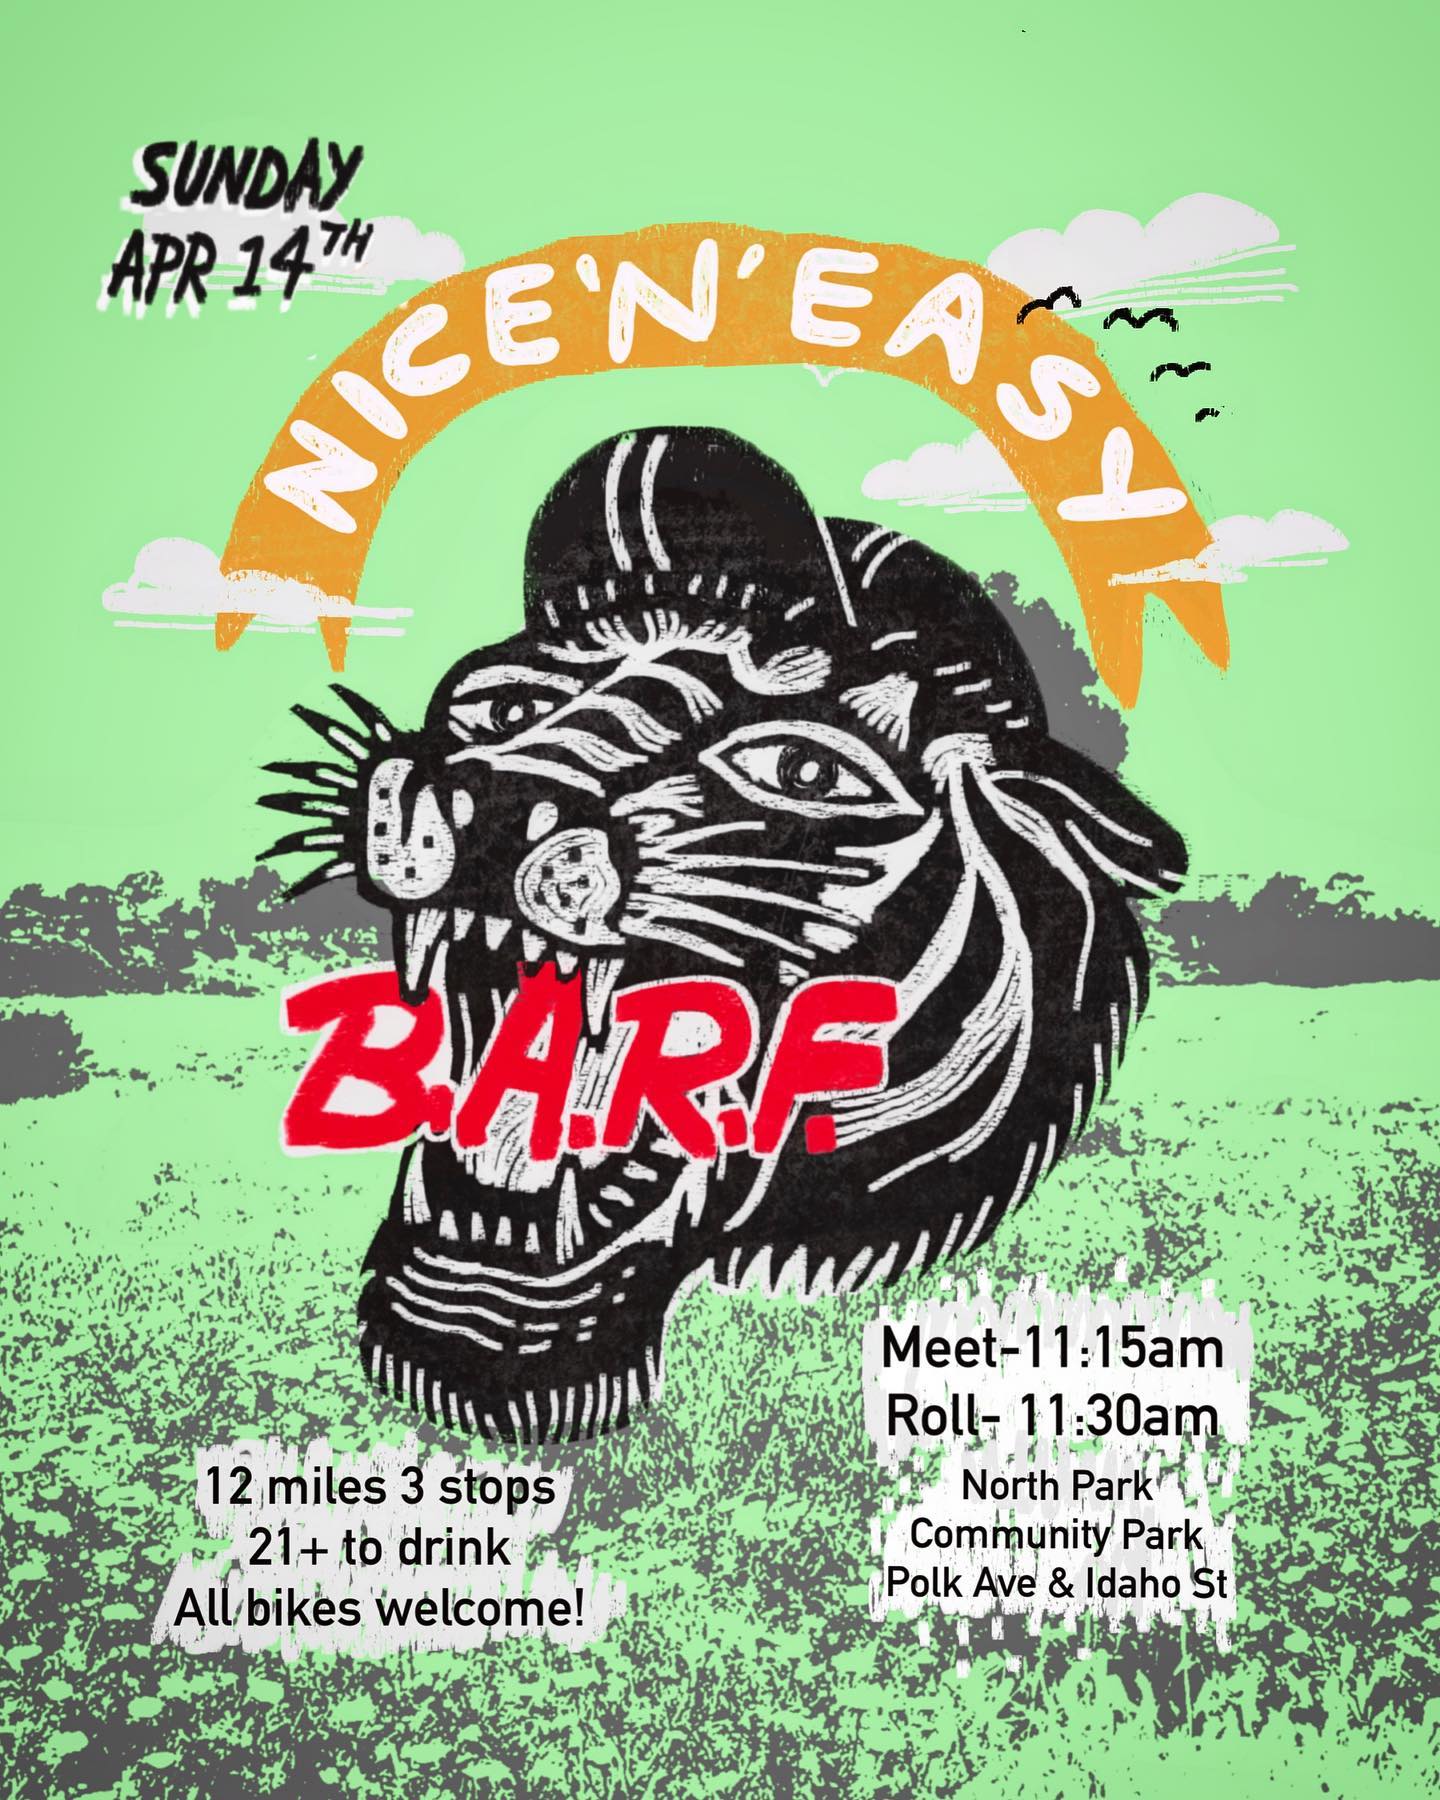 A collaboration with B.A.R.F (Bikes Are Really Fun). They know best on how to put fun between the legs so we look forward to our FIRST colab with them on Morley field, all bikes welcome to participate. 